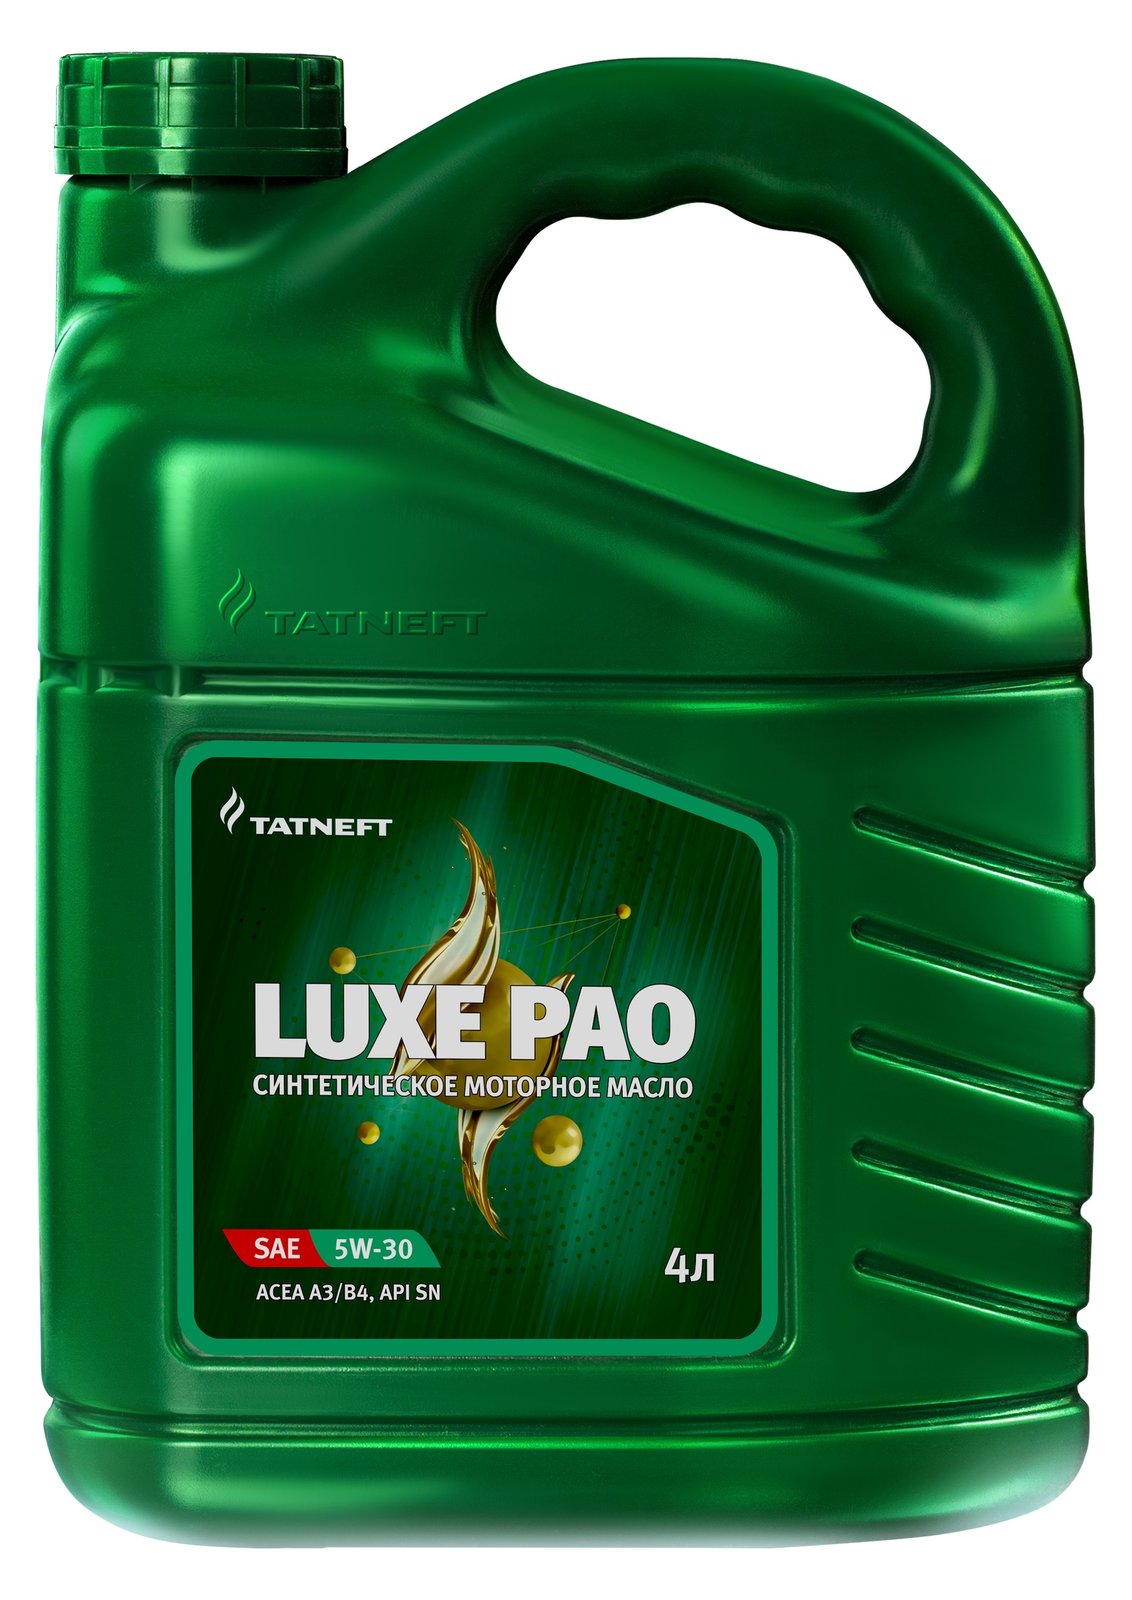 Масло oil 0w30. TATNEFT Luxe Pao 5w-40. Масло моторное Татнефть 5w30 Luxe Pao. Татнефть масло моторное Luxe Pao синтетика 5w-30 (4л) - 12116. Моторное масло Татнефть Luxe Pao SN a3/b4 5w-40, 10л.